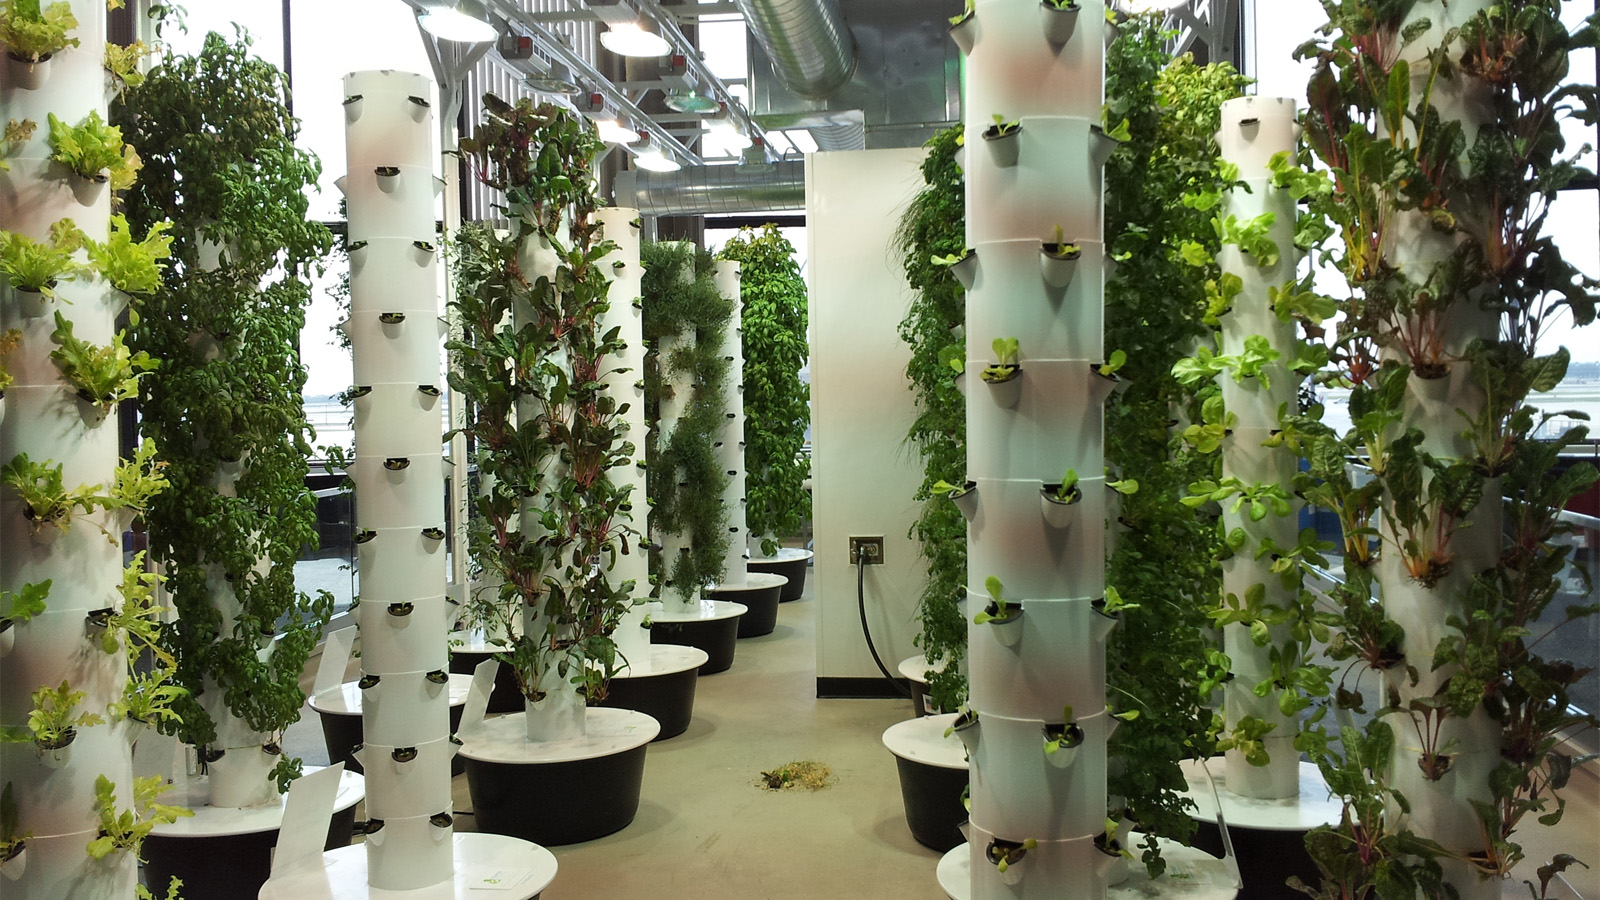 This Is The Future: 14 High-Tech Farms Where Veggies Grow Indoors